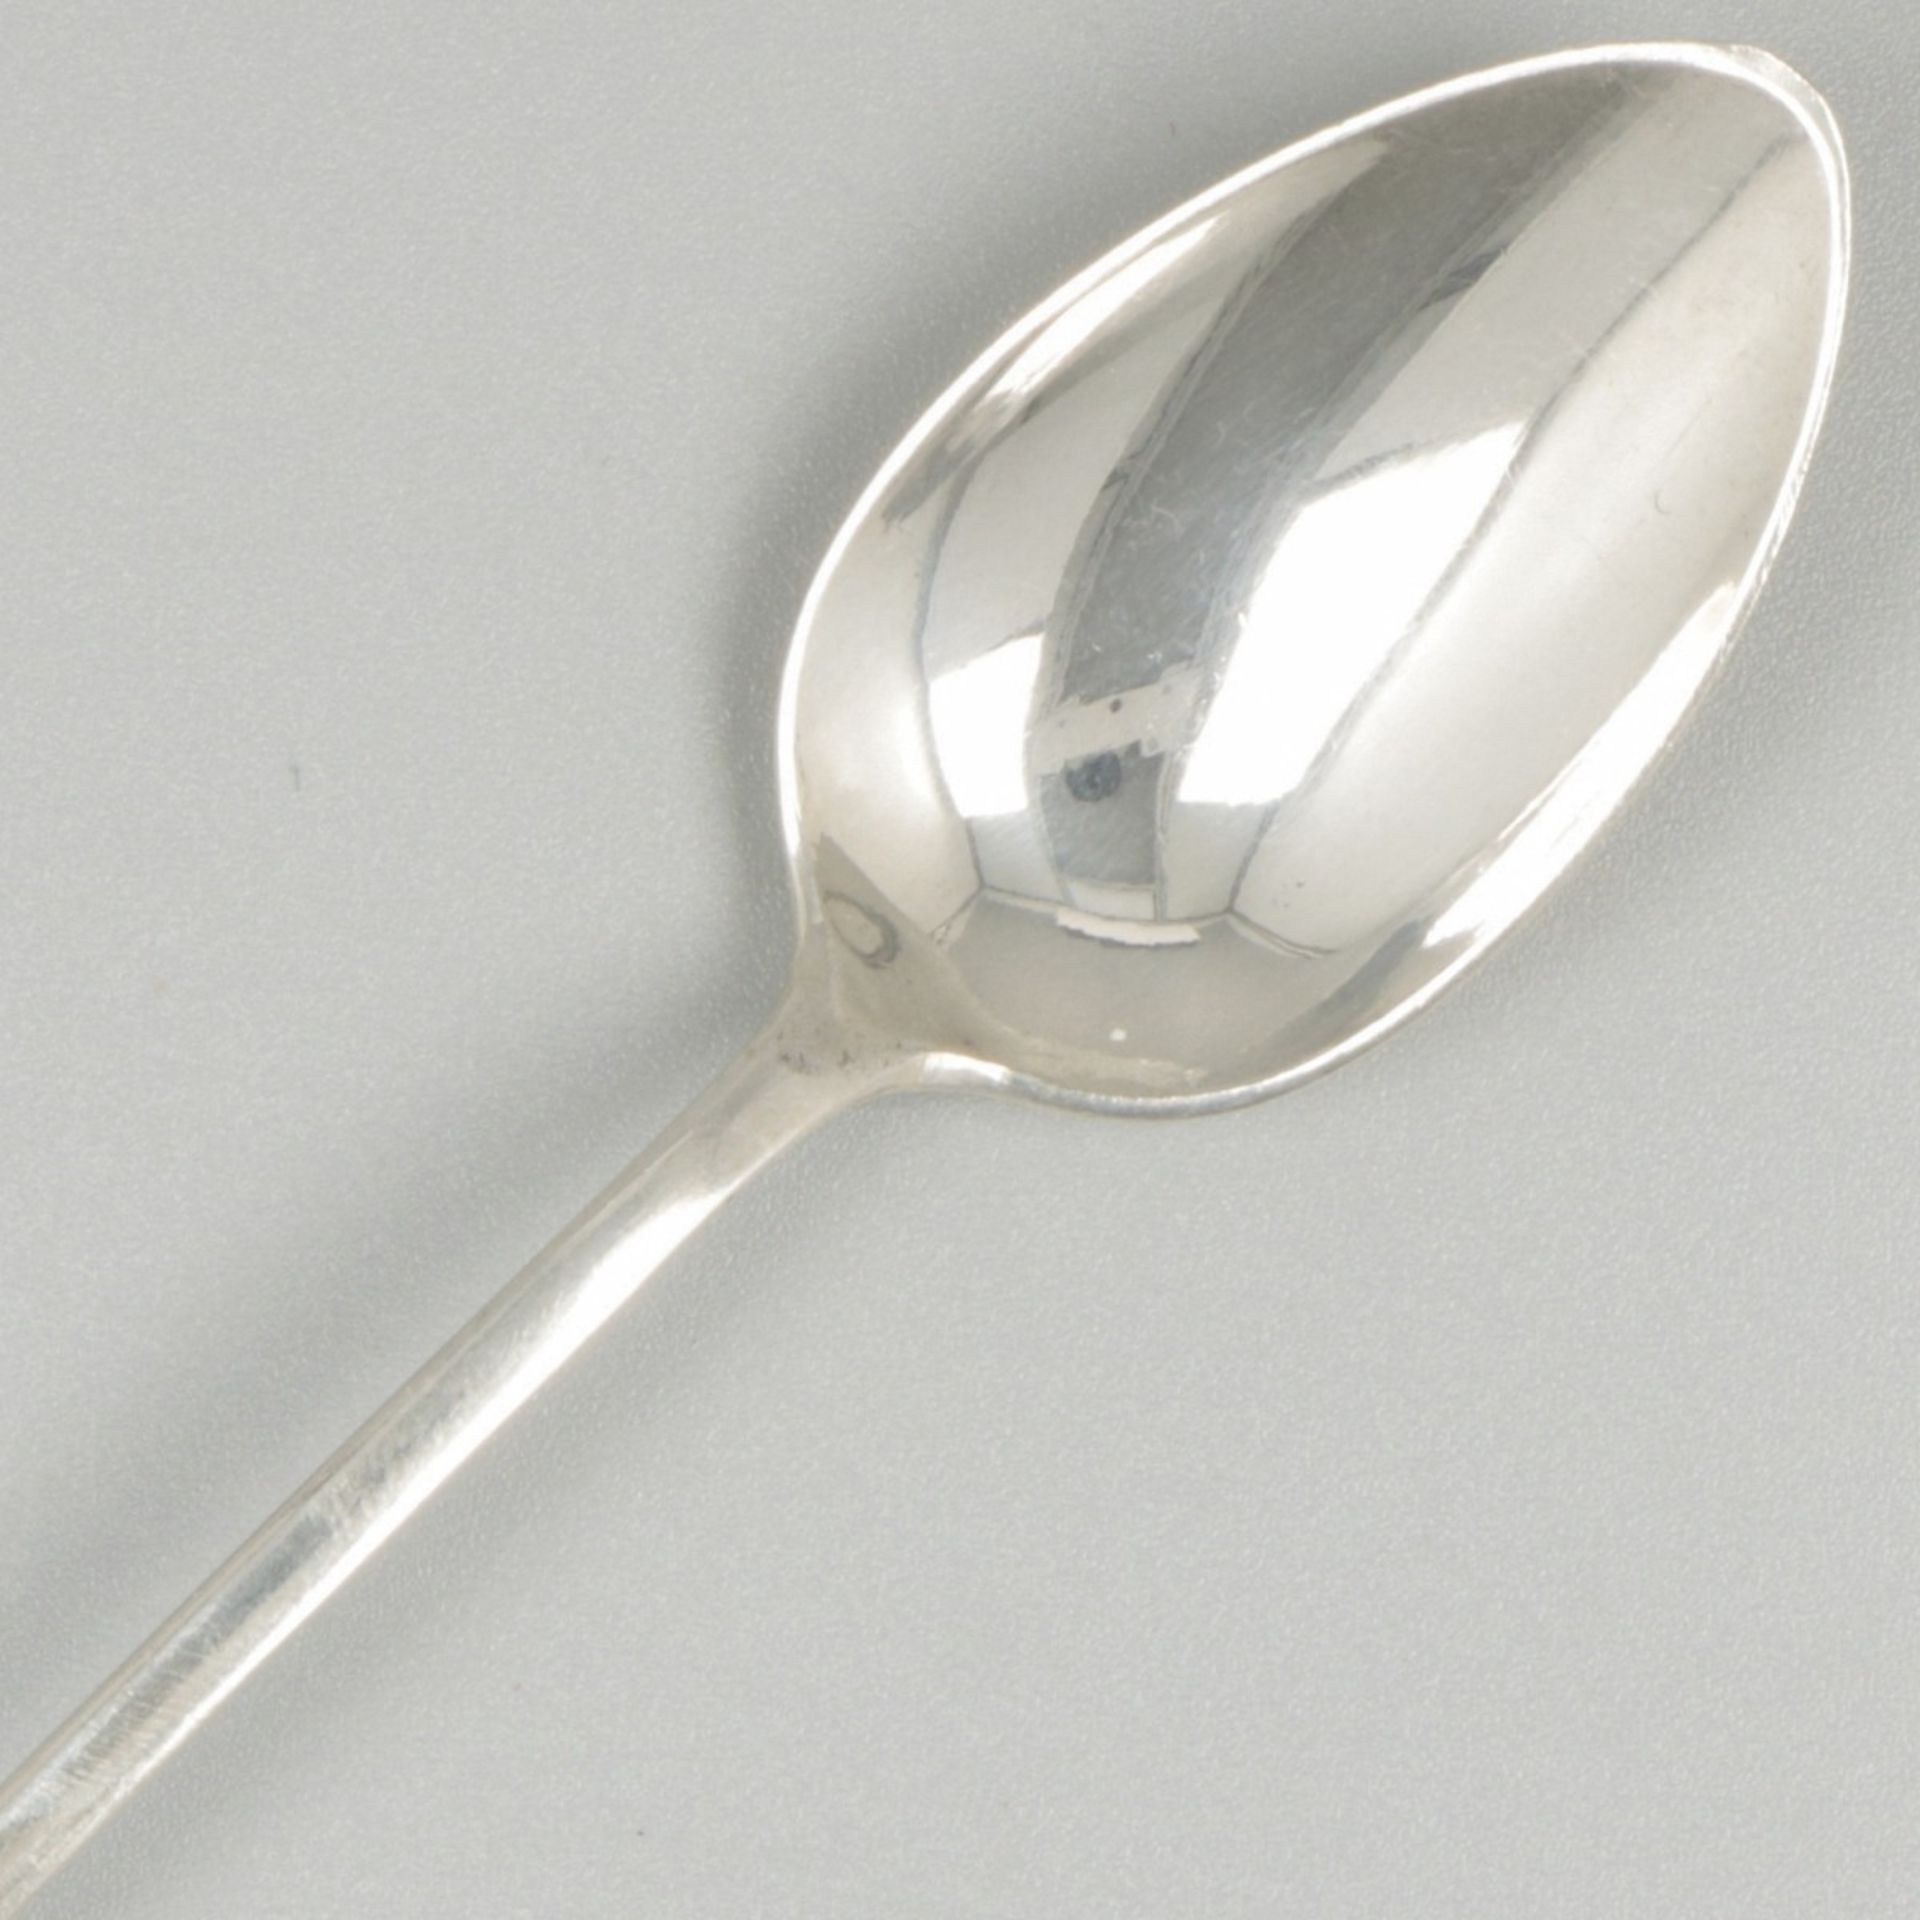 8-piece set of ice cream spoons silver. - Image 4 of 6